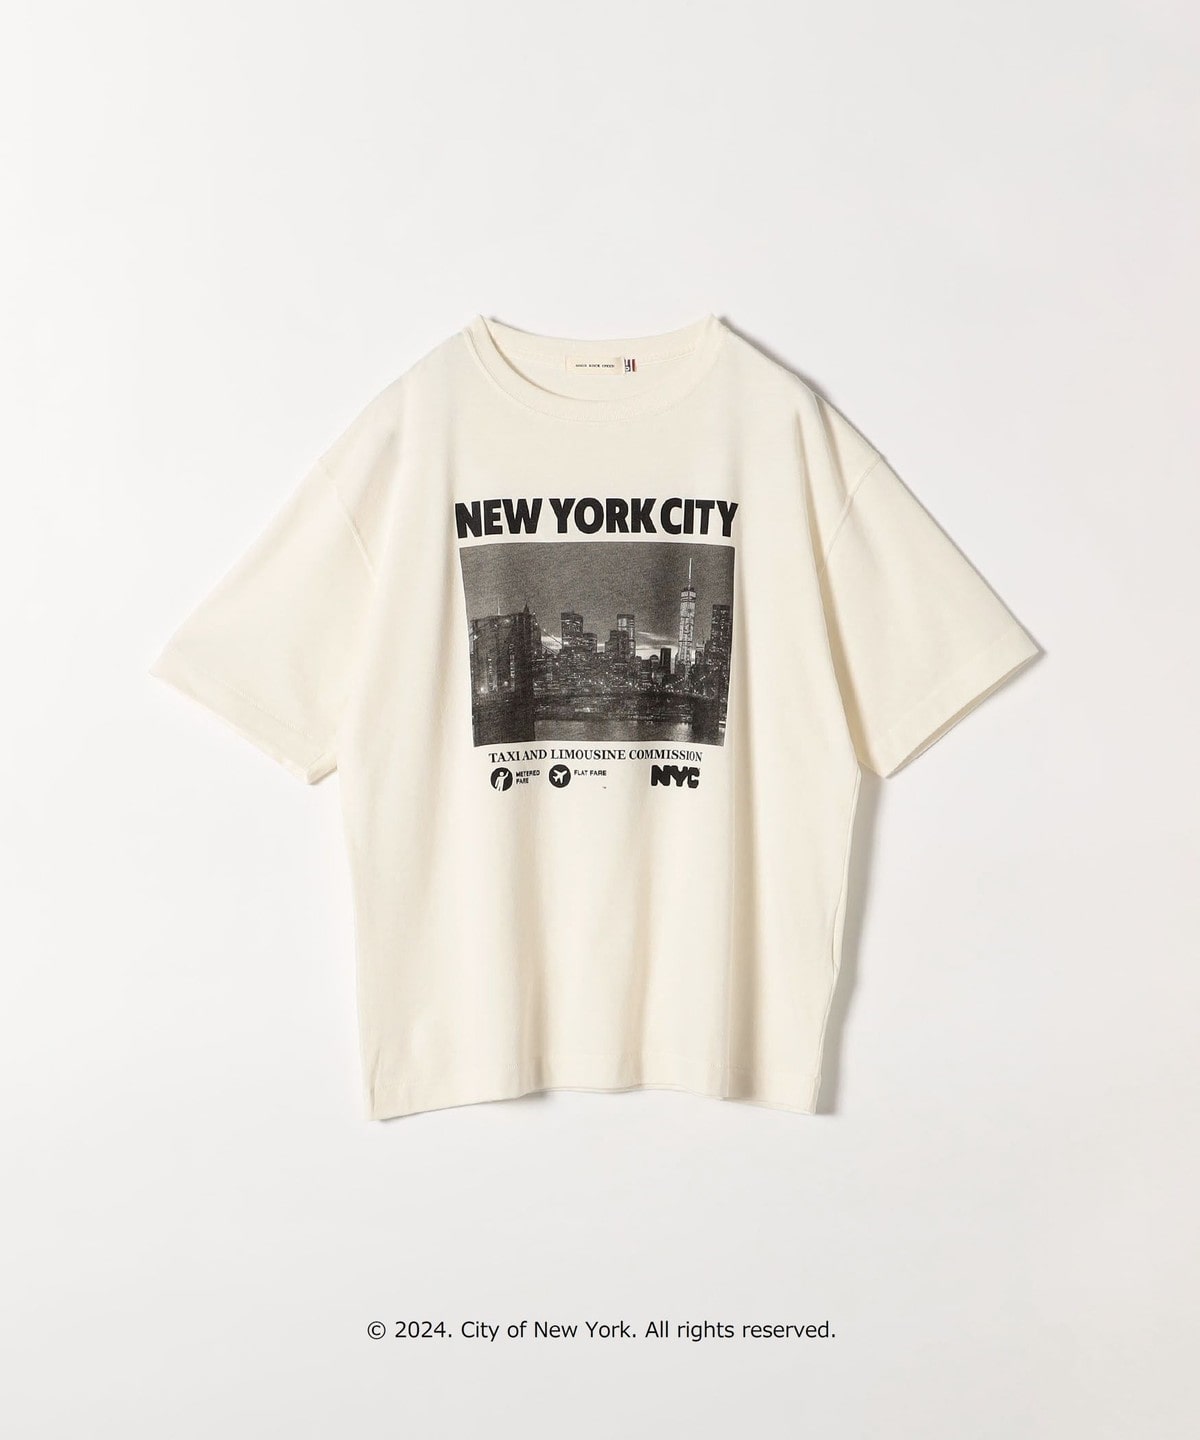 GOOD ROCK SPEED:〈洗濯機可能〉NYC フォト TEE: Tシャツ/カットソー 